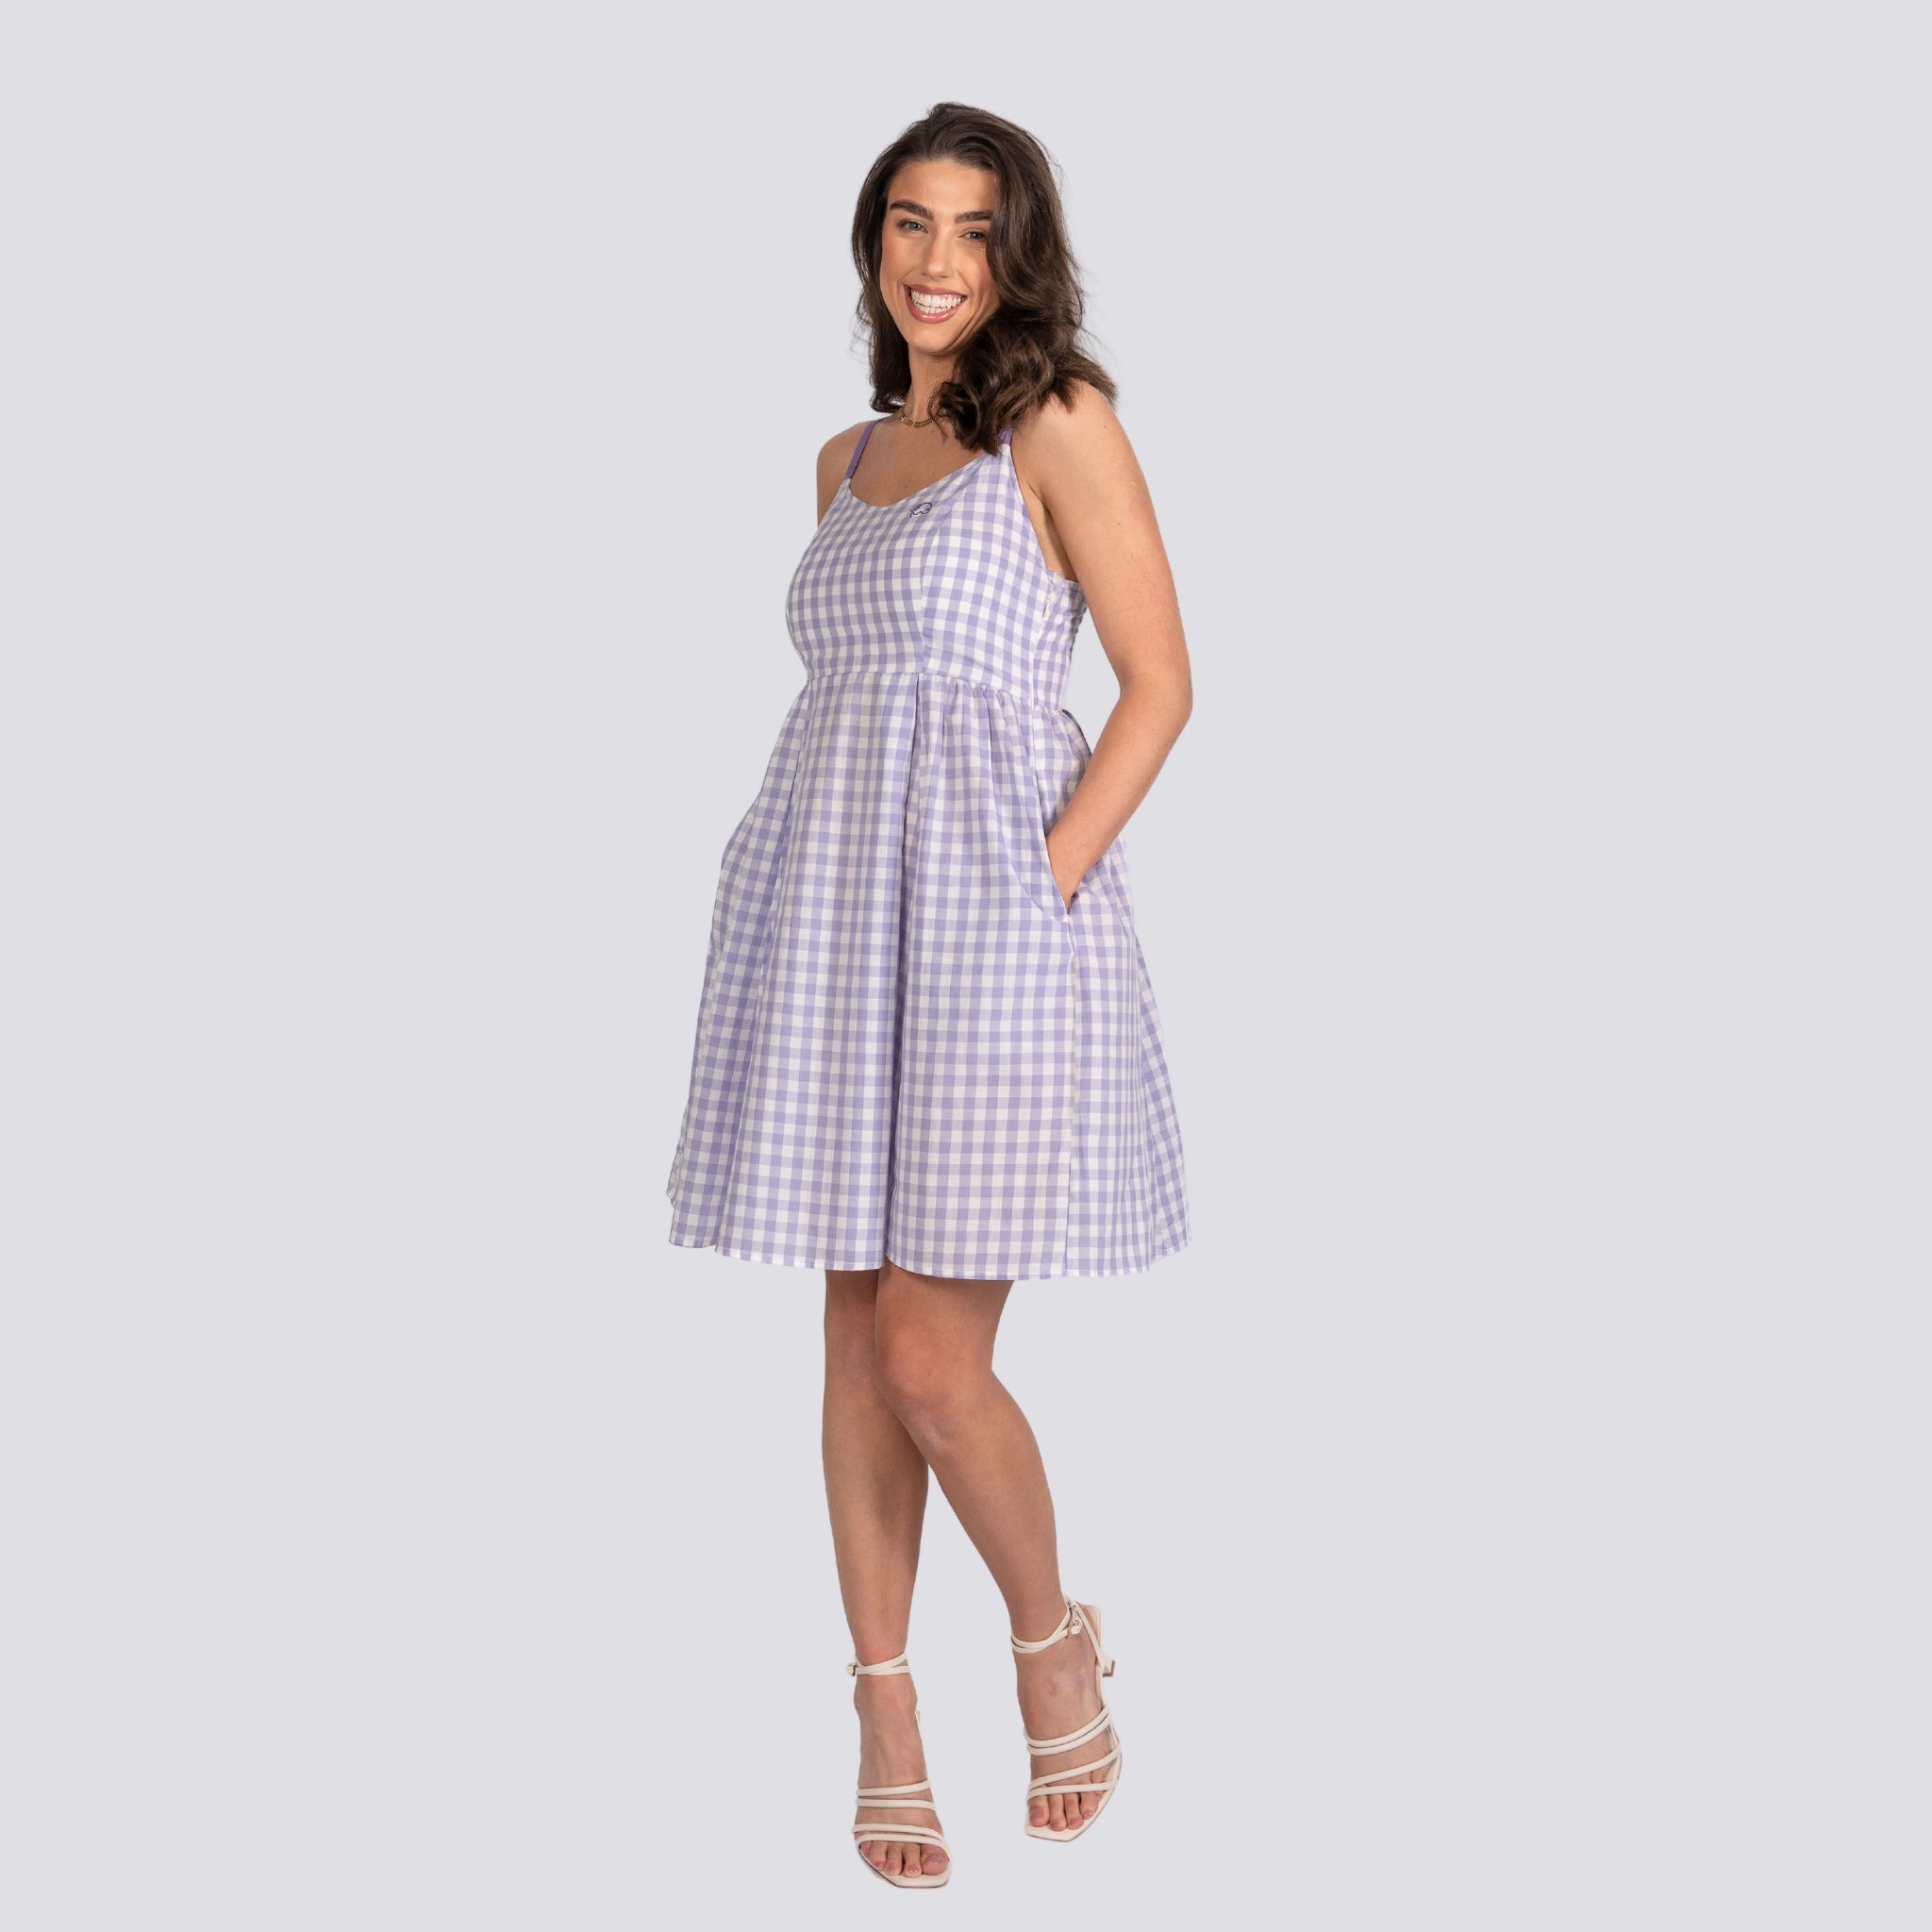 Woman in a Karee lavender plaid cotton mini dress and white sandals, smiling and posing against a grey background.